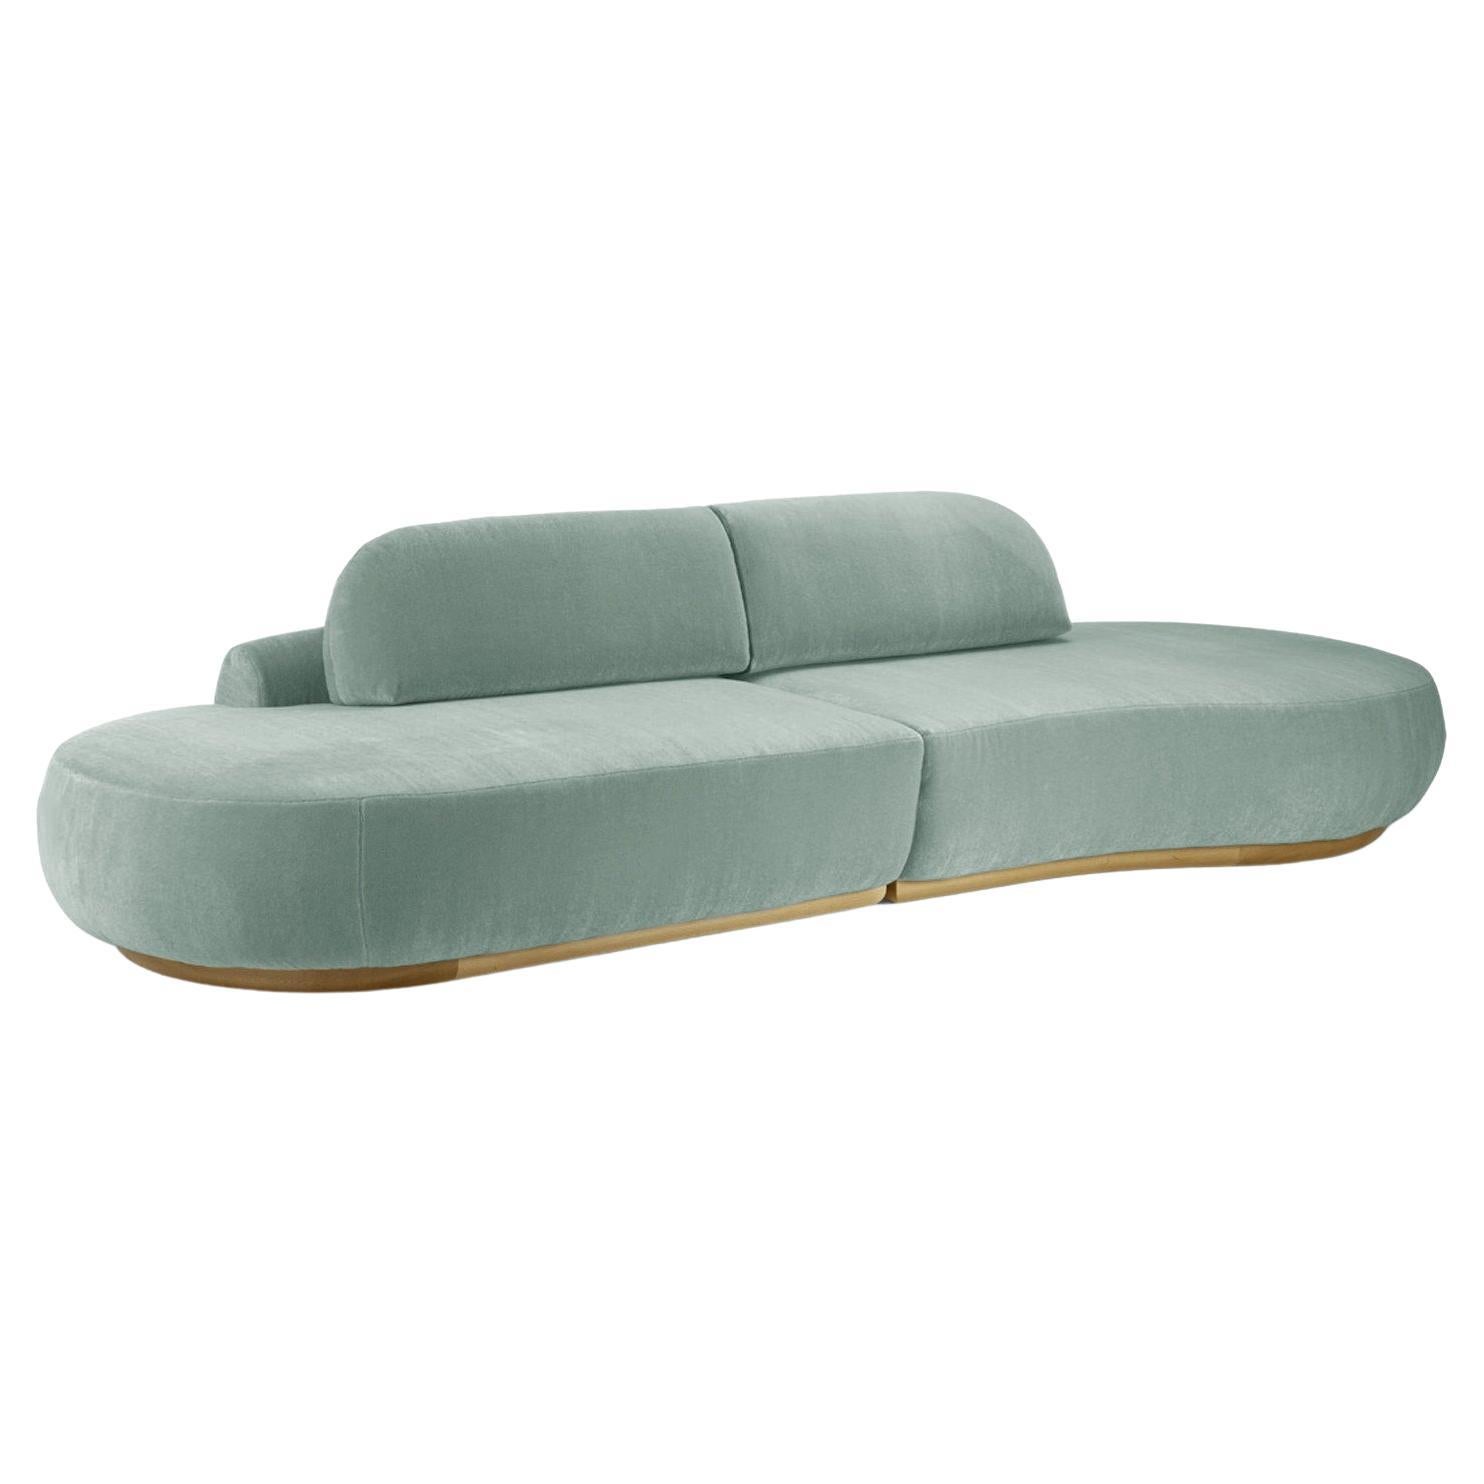 Naked Curved Sectional Sofa, 2 Piece with Natural Oak and Smooth 60 For Sale